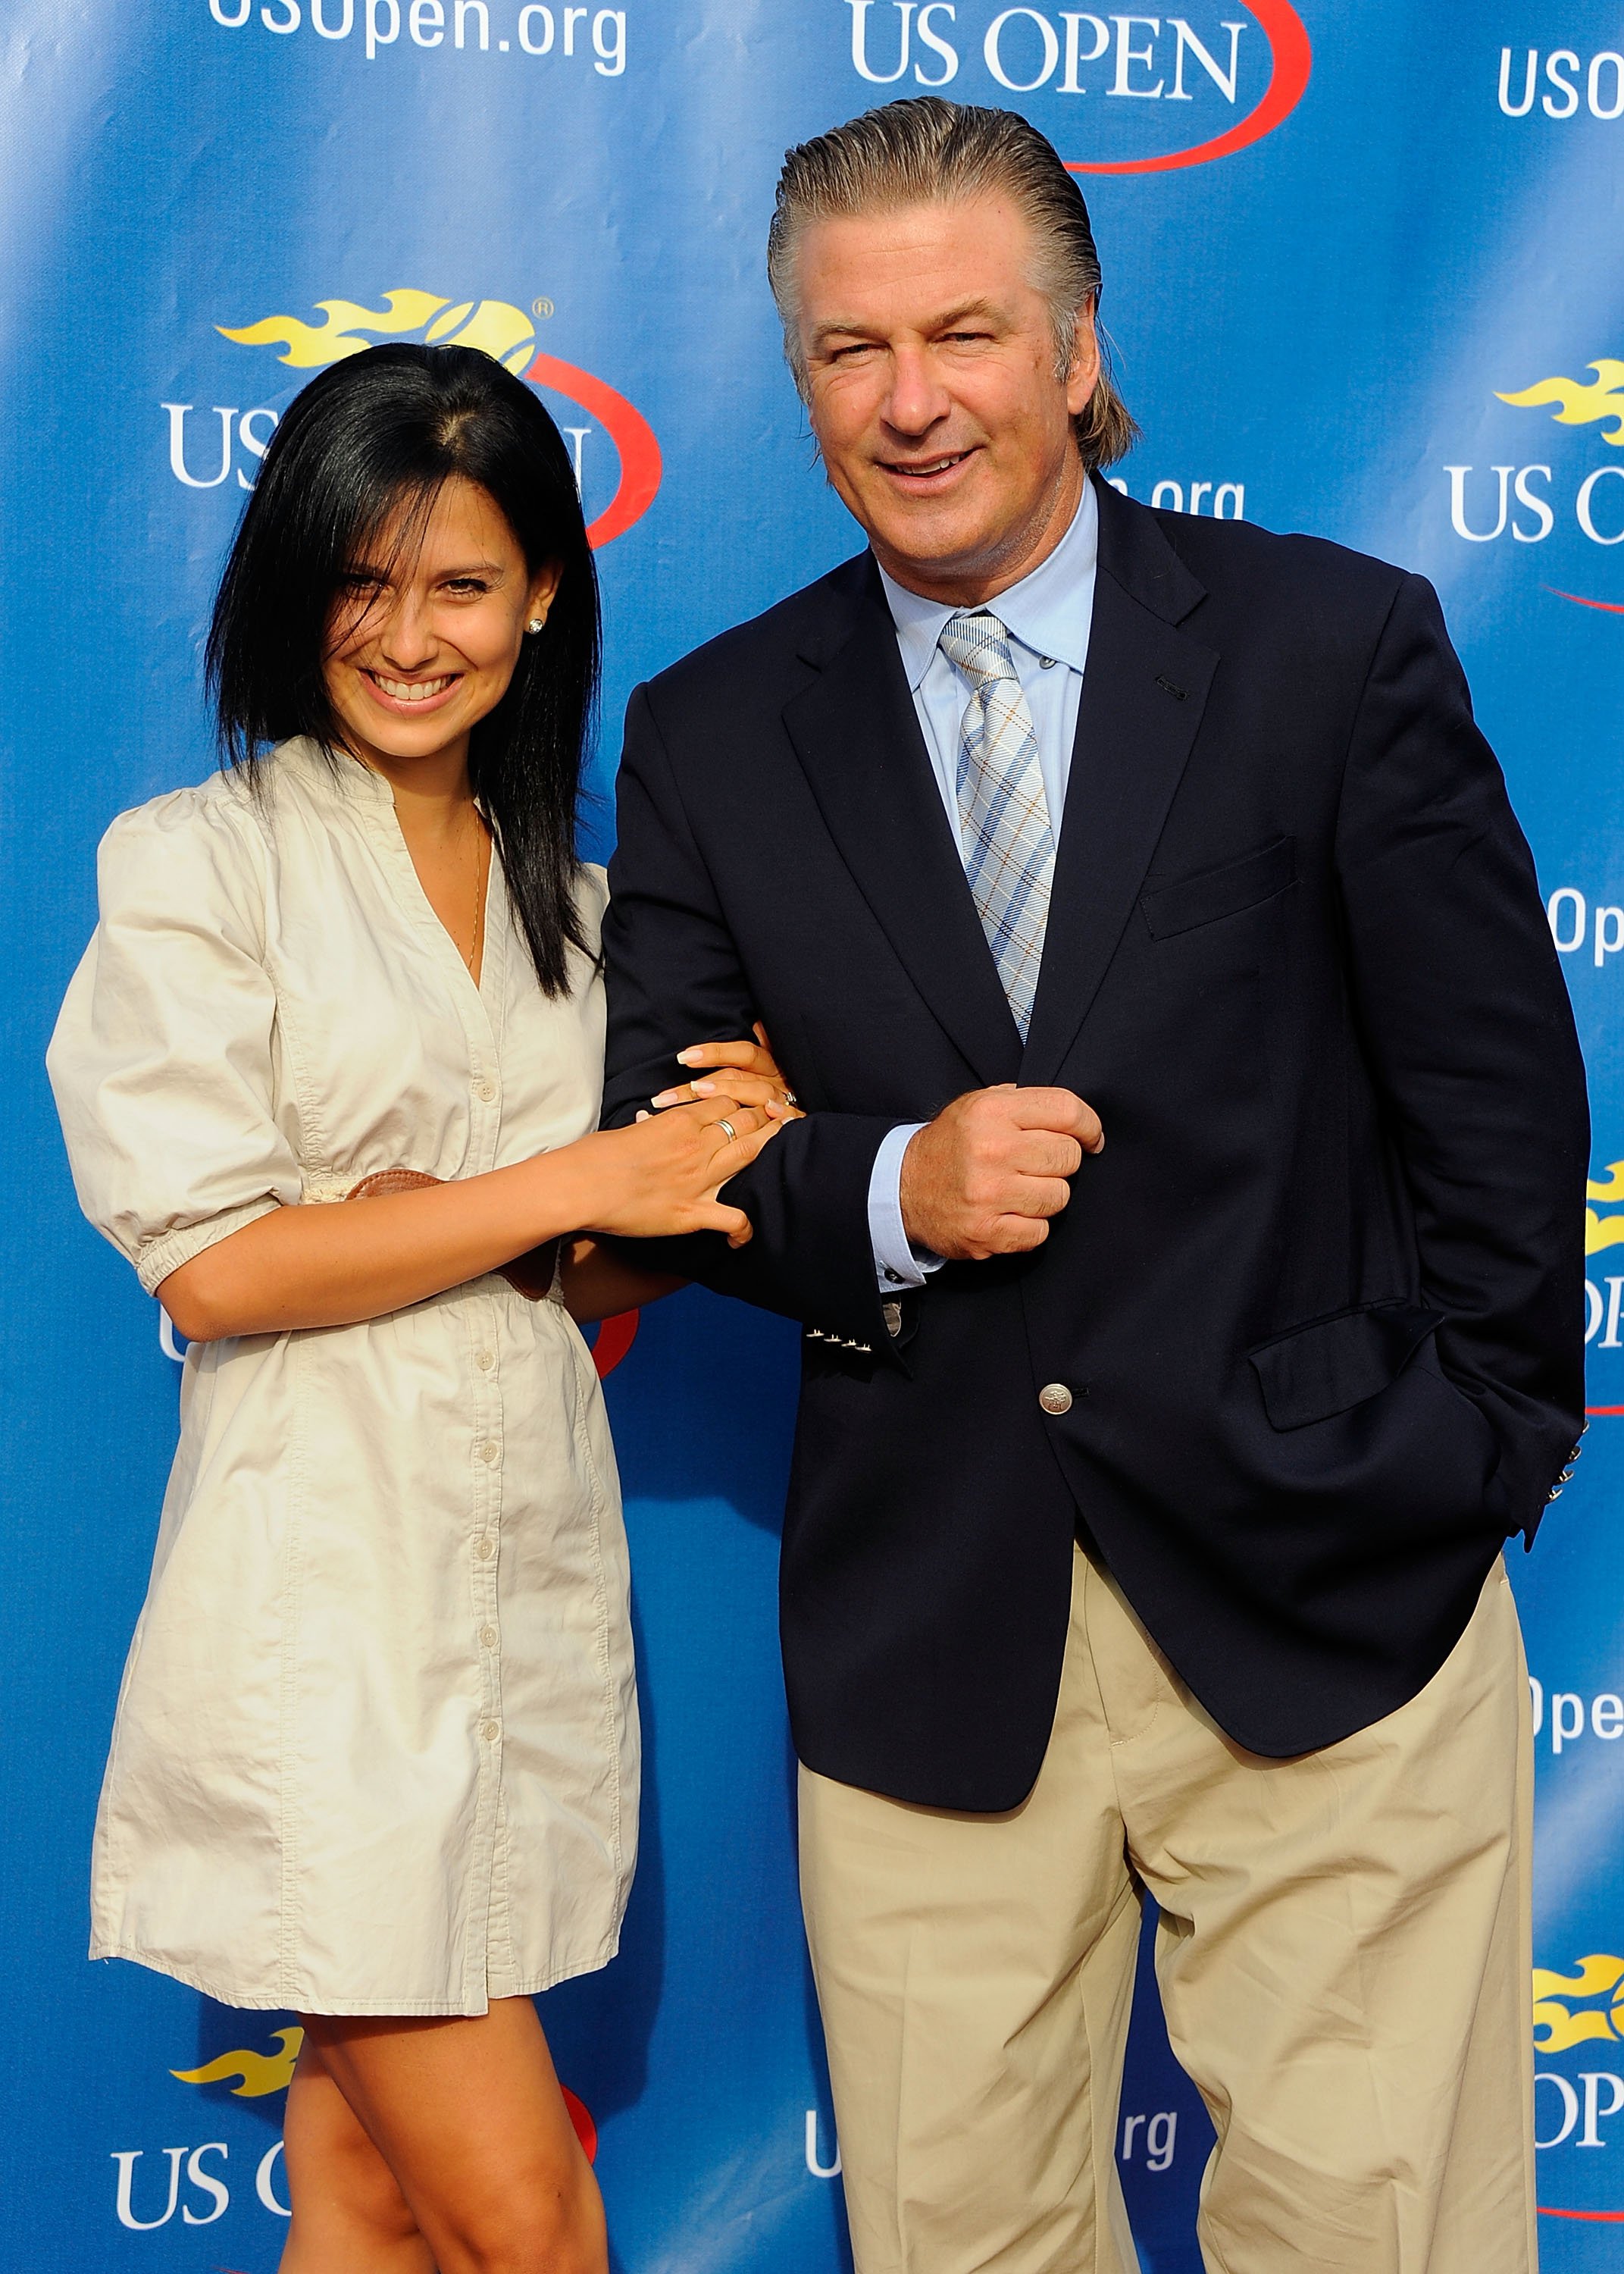 Hilaria Thomas and Alec Baldwin attend the 2011 US Open opening night ceremony at the USTA Billie Jean King National Tennis Center on August 29, 2011 in New York City. | Source: Getty Images